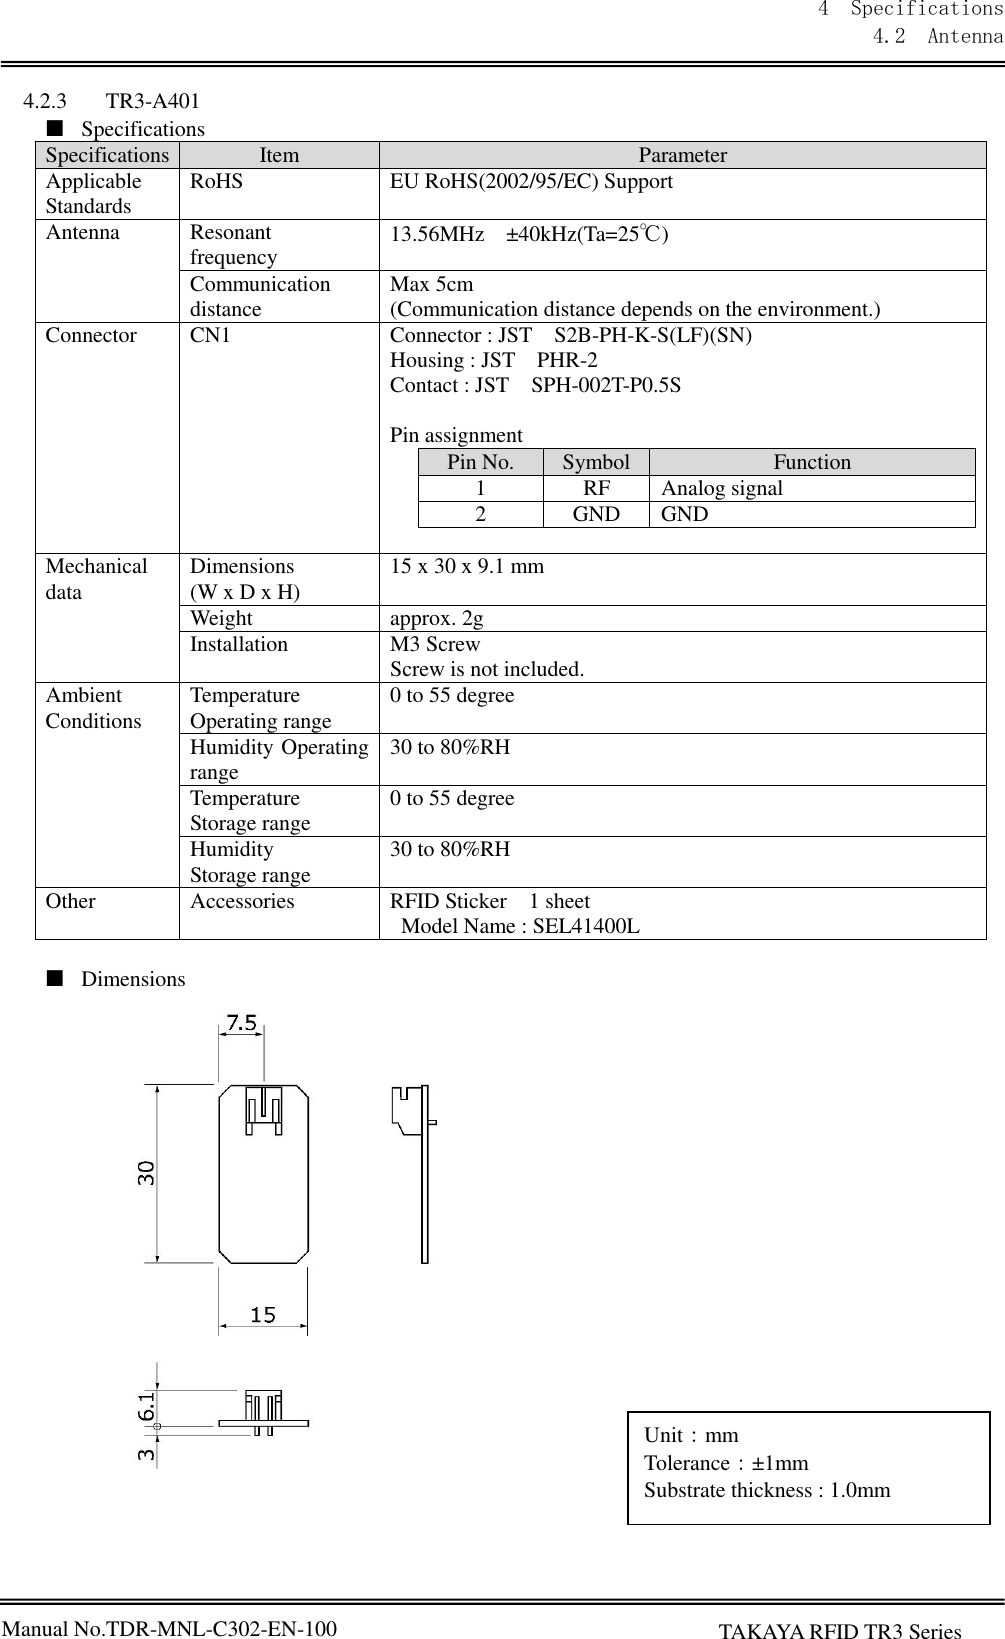 Manual No.TDR-MNL-C302-EN-100 4  Specifications 4.2  Antenna      TAKAYA RFID TR3 Series  4.2.3 TR3-A401 ■ Specifications Specifications Item Parameter Applicable Standards RoHS EU RoHS(2002/95/EC) Support Antenna Resonant frequency 13.56MHz ±40kHz(Ta=25℃) Communication distance Max 5cm (Communication distance depends on the environment.) Connector CN1 Connector : JST S2B-PH-K-S(LF)(SN) Housing : JST PHR-2 Contact : JST SPH-002T-P0.5S  Pin assignment Pin No. Symbol Function 1 RF Analog signal 2 GND GND    Mechanical data Dimensions (W x D x H) 15 x 30 x 9.1 mm Weight approx. 2g Installation M3 Screw   Screw is not included. Ambient Conditions Temperature Operating range 0 to 55 degree Humidity Operating range 30 to 80%RH Temperature Storage range 0 to 55 degree Humidity Storage range 30 to 80%RH Other Accessories RFID Sticker 1 sheet   Model Name : SEL41400L  ■ Dimensions                      Unit：mm Tolerance：±1mm Substrate thickness : 1.0mm 